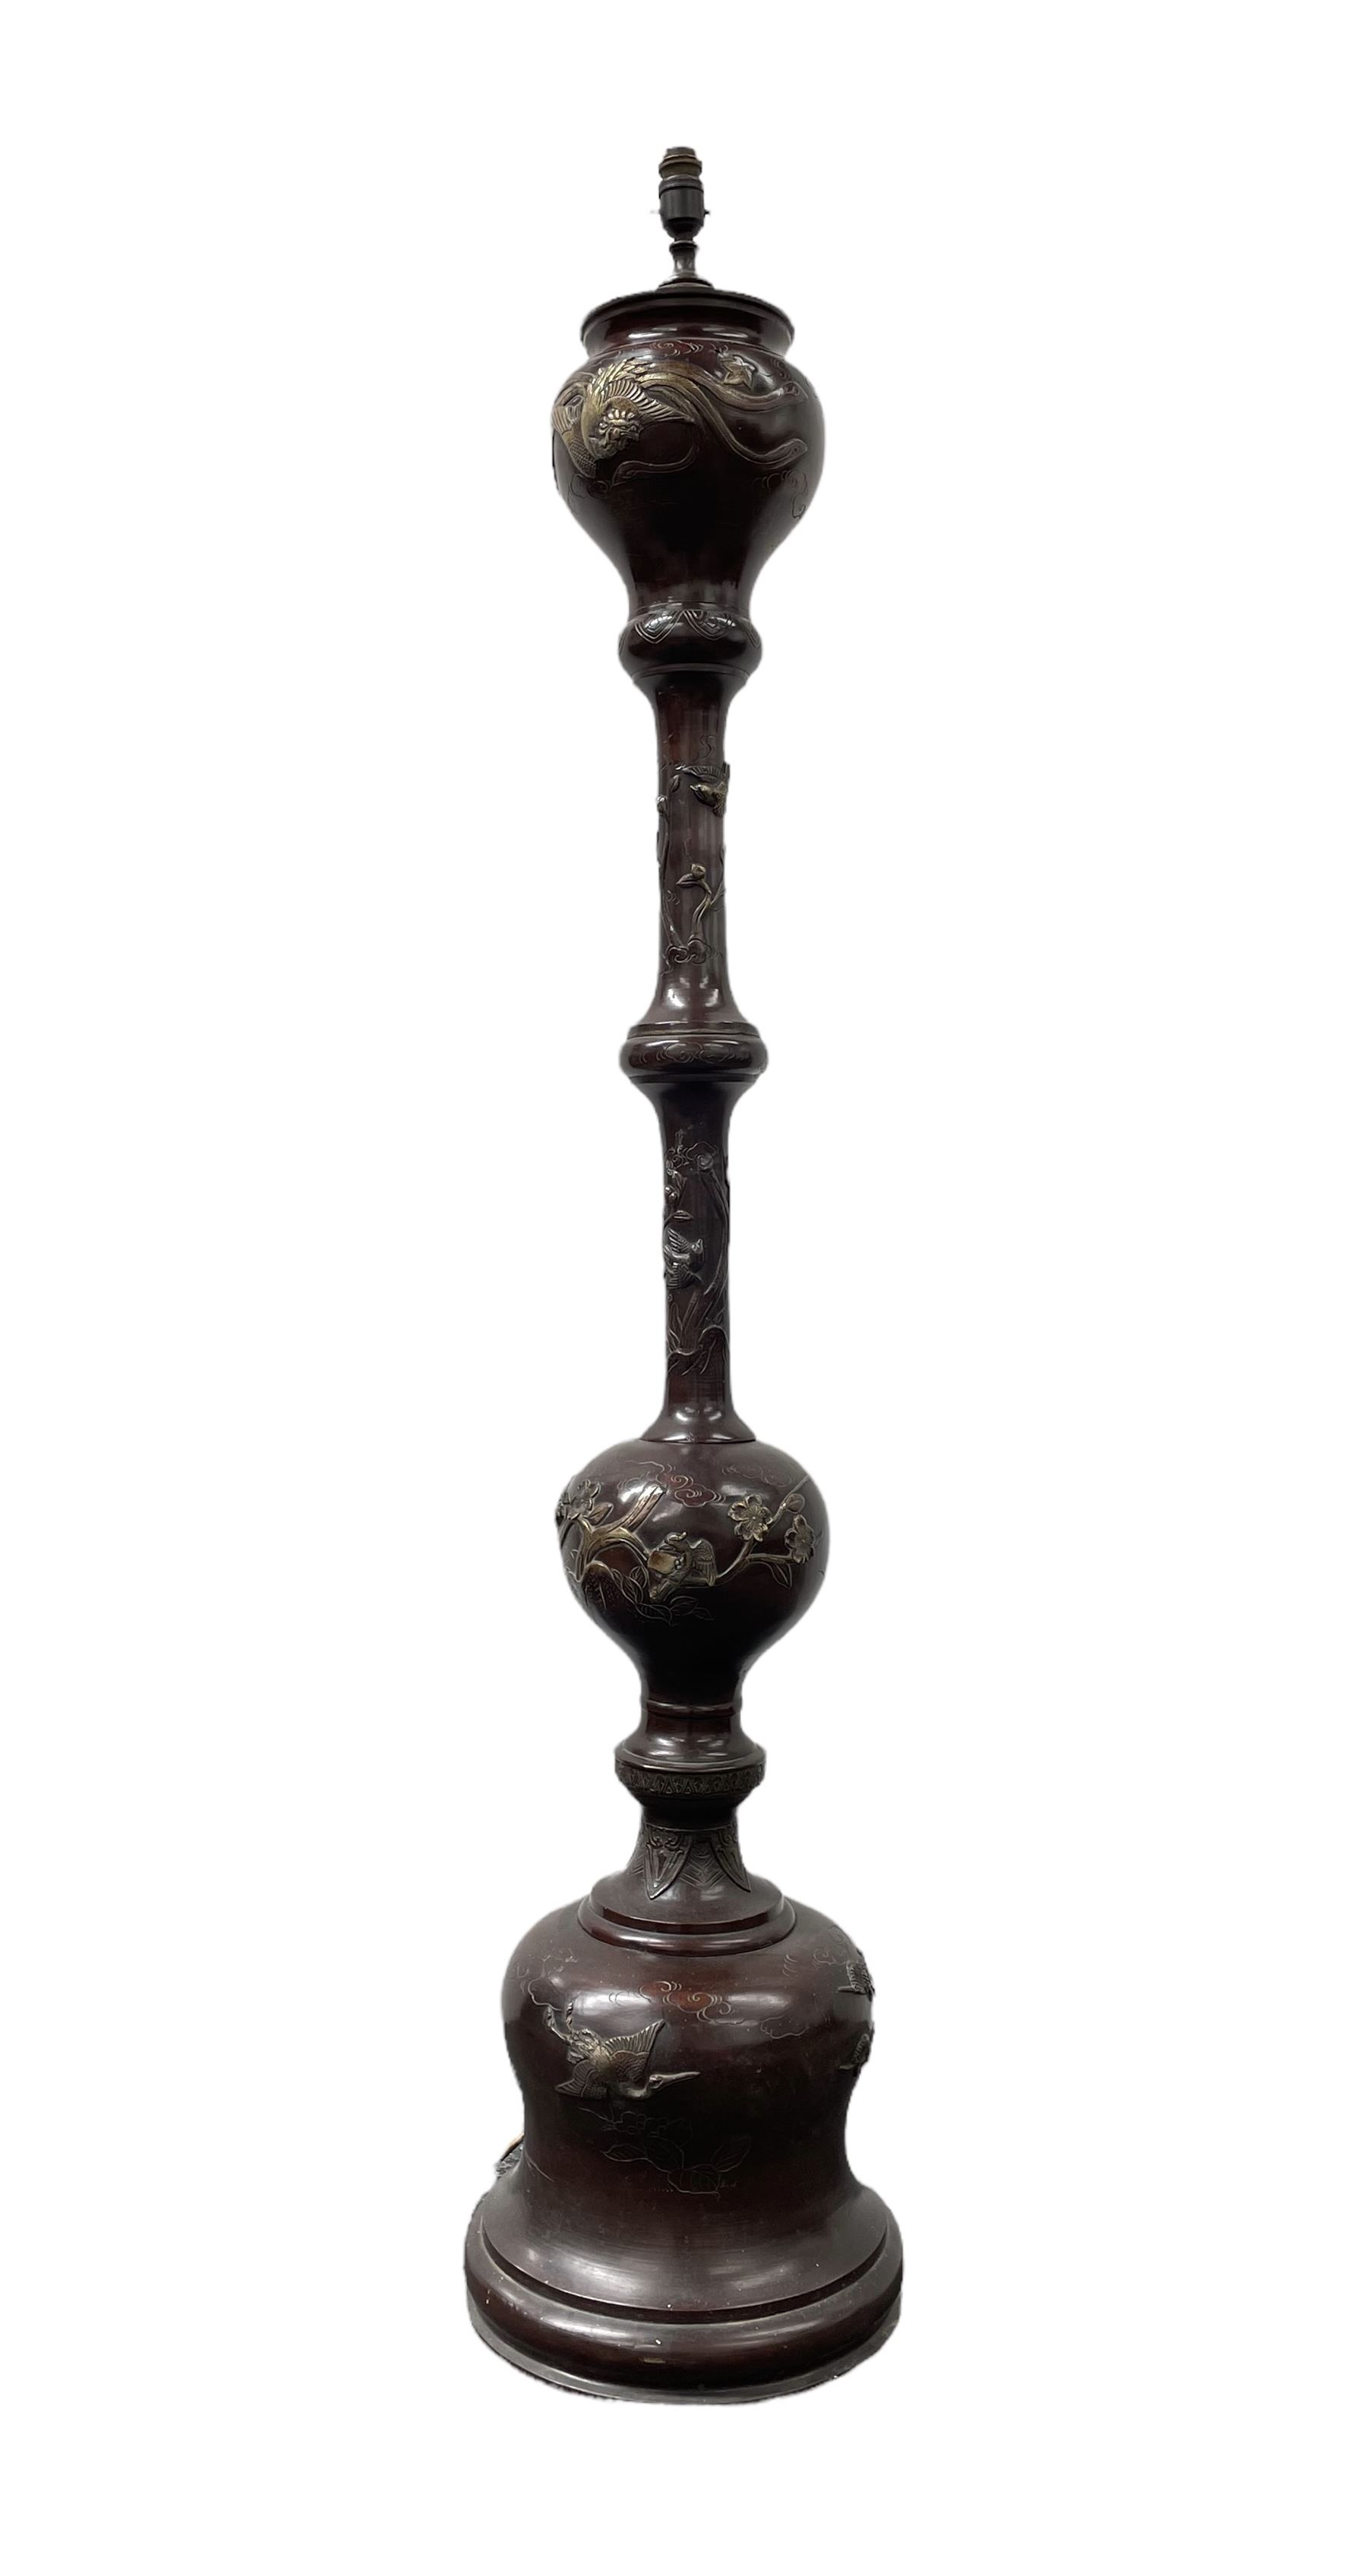 Early 20th century Japanese bronze standard lamp of baluster design decorated with a raised pattern